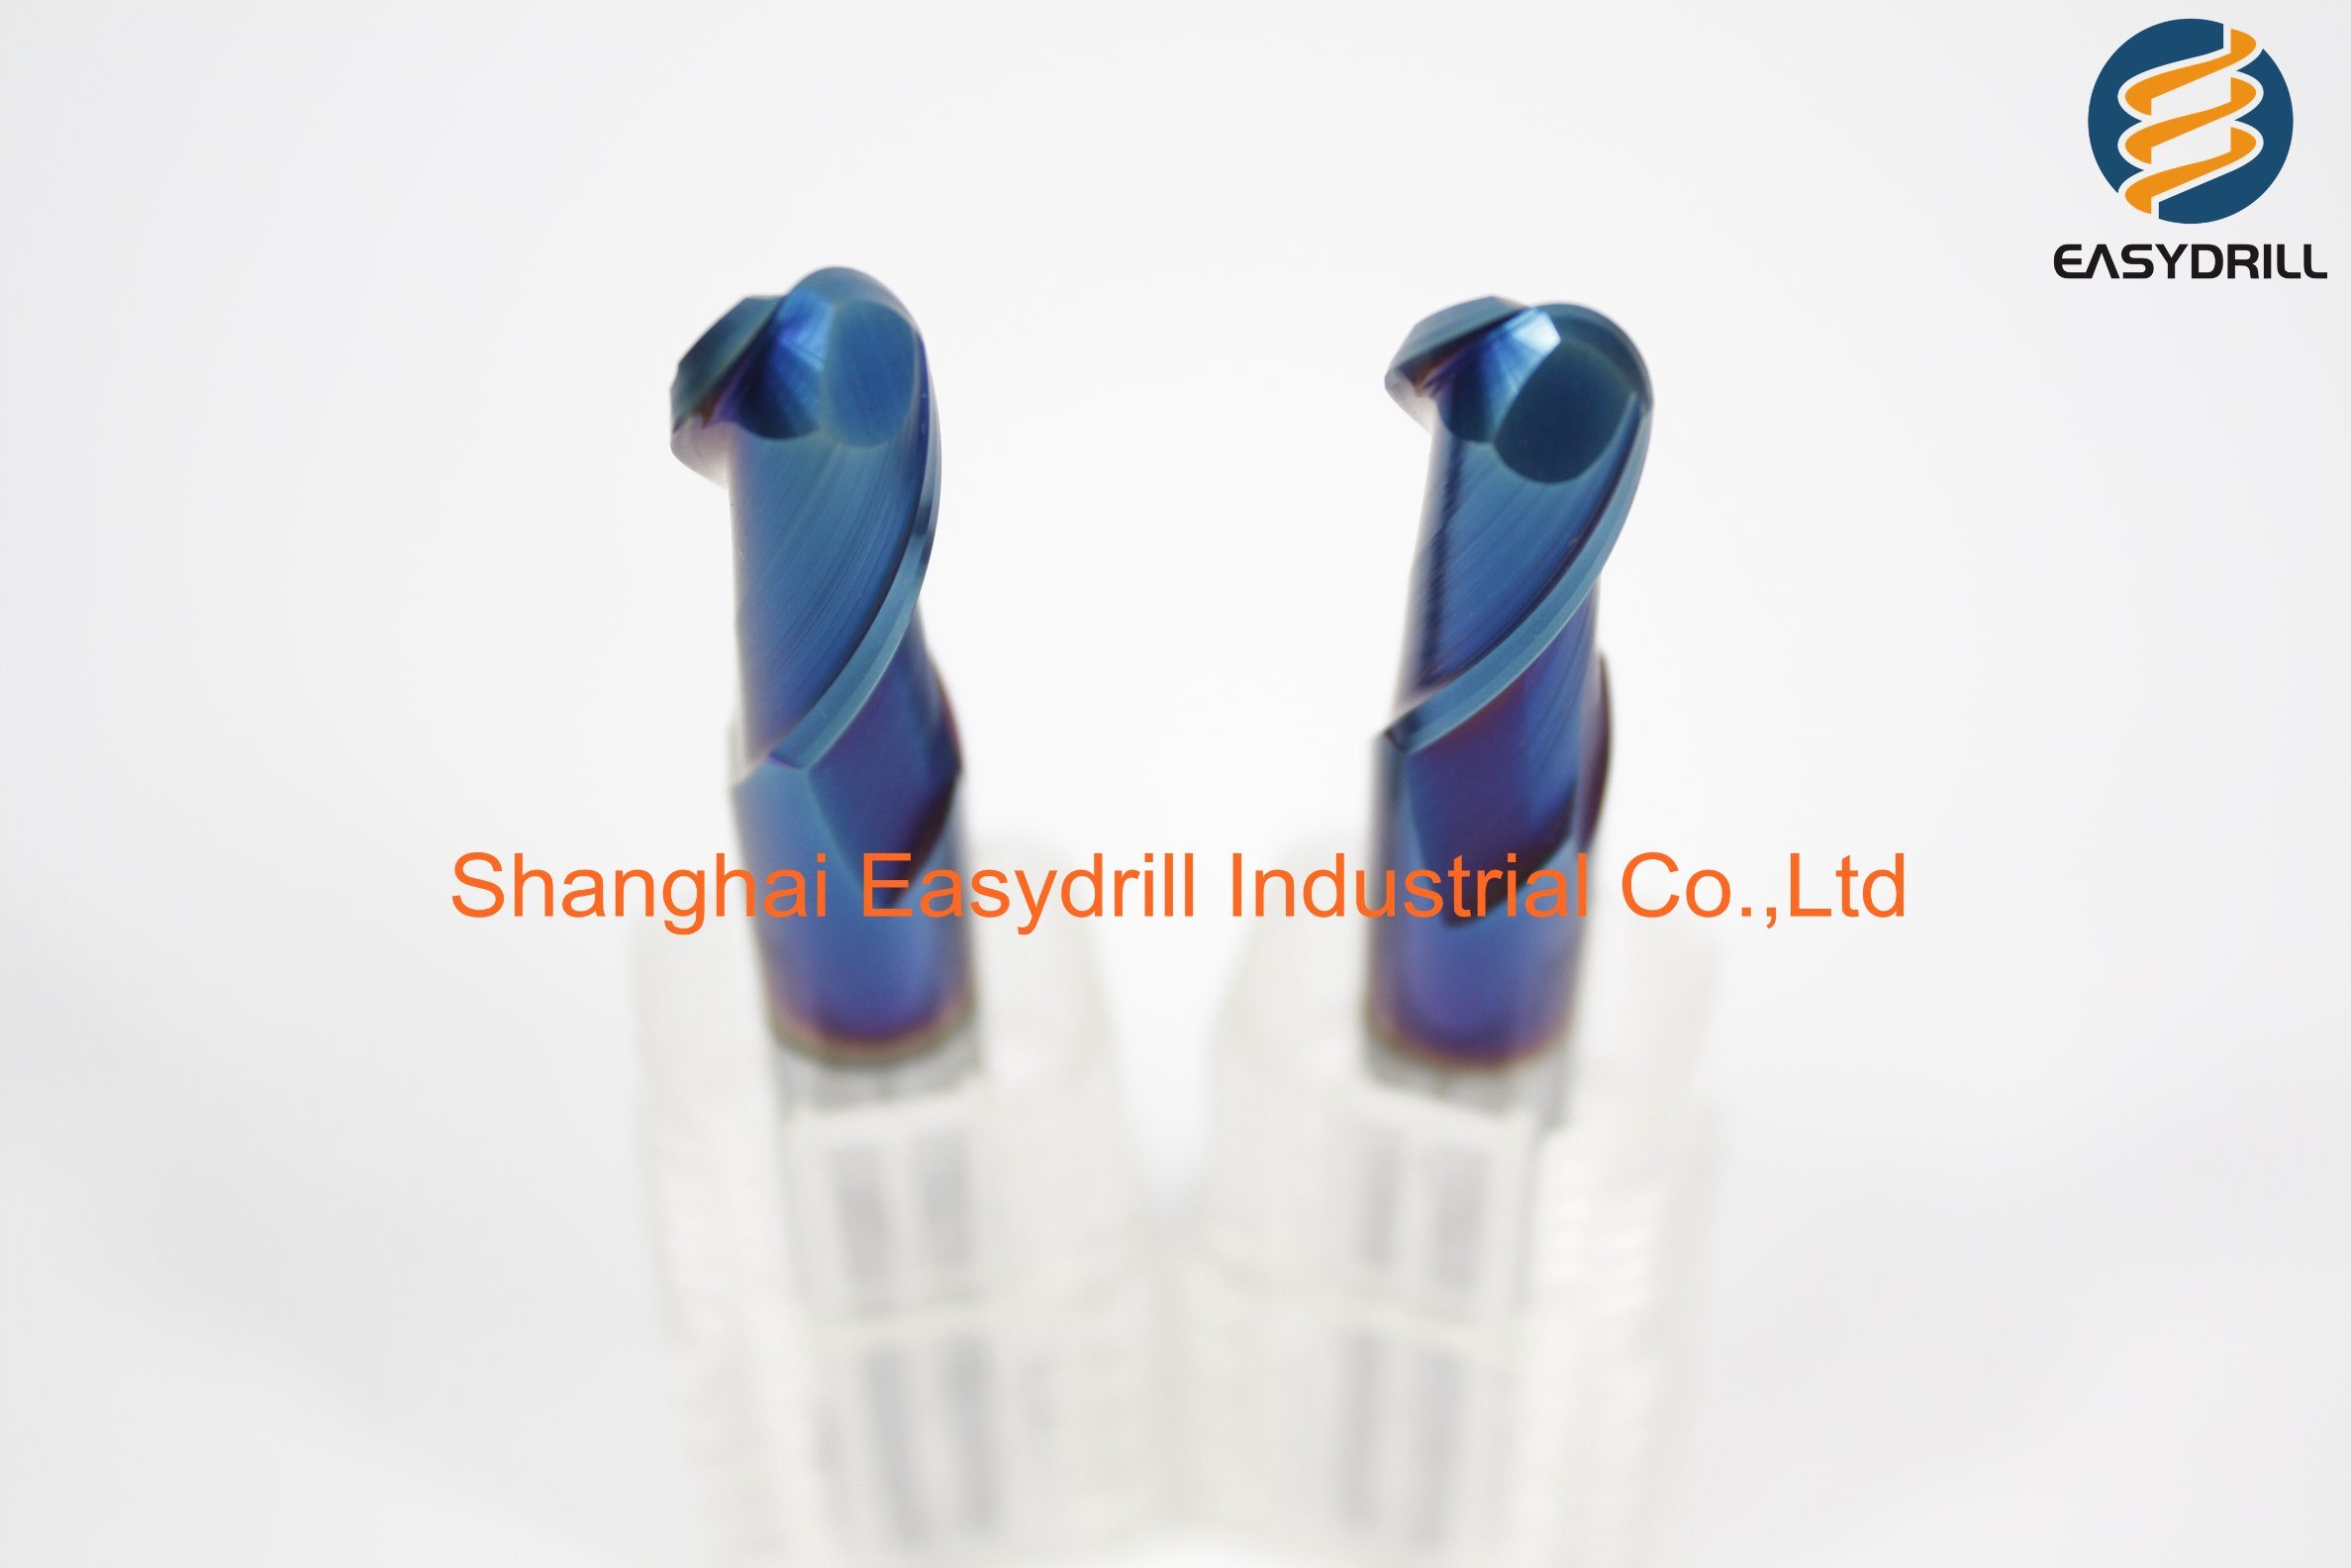 HSS Ball Nose End Mill with DIN327 Standard (SED-EM-BN327)